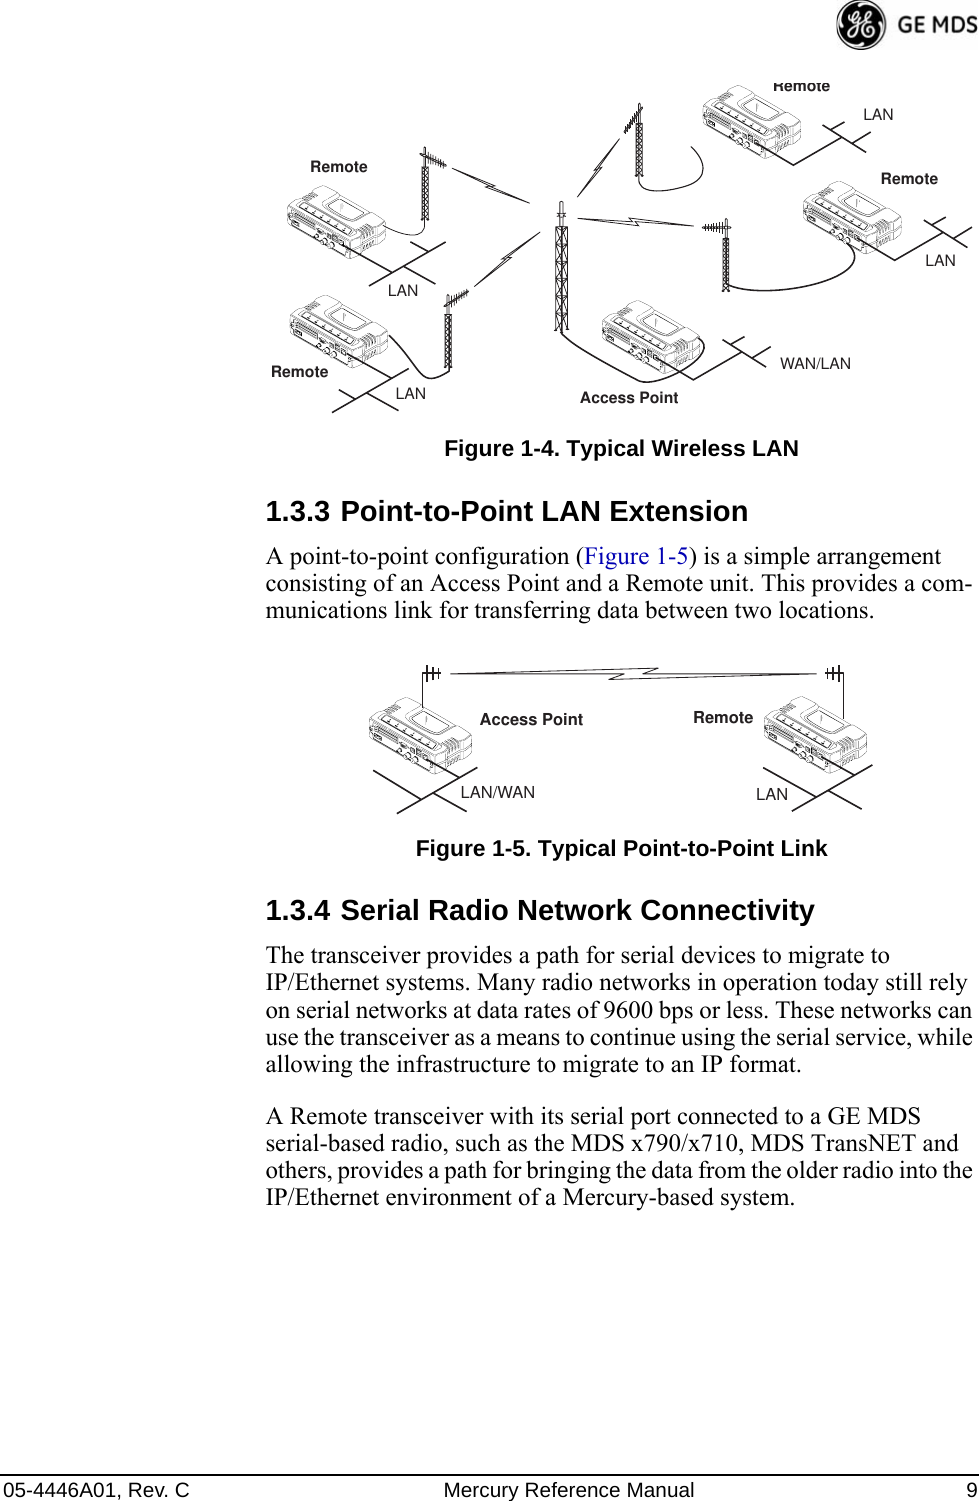 05-4446A01, Rev. C Mercury Reference Manual 9Invisible place holderFigure 1-4. Typical Wireless LAN1.3.3 Point-to-Point LAN ExtensionA point-to-point configuration (Figure 1-5) is a simple arrangement consisting of an Access Point and a Remote unit. This provides a com-munications link for transferring data between two locations.Invisible place holderFigure 1-5. Typical Point-to-Point Link1.3.4 Serial Radio Network ConnectivityThe transceiver provides a path for serial devices to migrate to IP/Ethernet systems. Many radio networks in operation today still rely on serial networks at data rates of 9600 bps or less. These networks can use the transceiver as a means to continue using the serial service, while allowing the infrastructure to migrate to an IP format.A Remote transceiver with its serial port connected to a GE MDS serial-based radio, such as the MDS x790/x710, MDS TransNET and others, provides a path for bringing the data from the older radio into the IP/Ethernet environment of a Mercury-based system.RemoteRemoteAccess PointRemoteRemoteLANLANWAN/LANLANLANLAN/WANAccess Point RemoteLAN